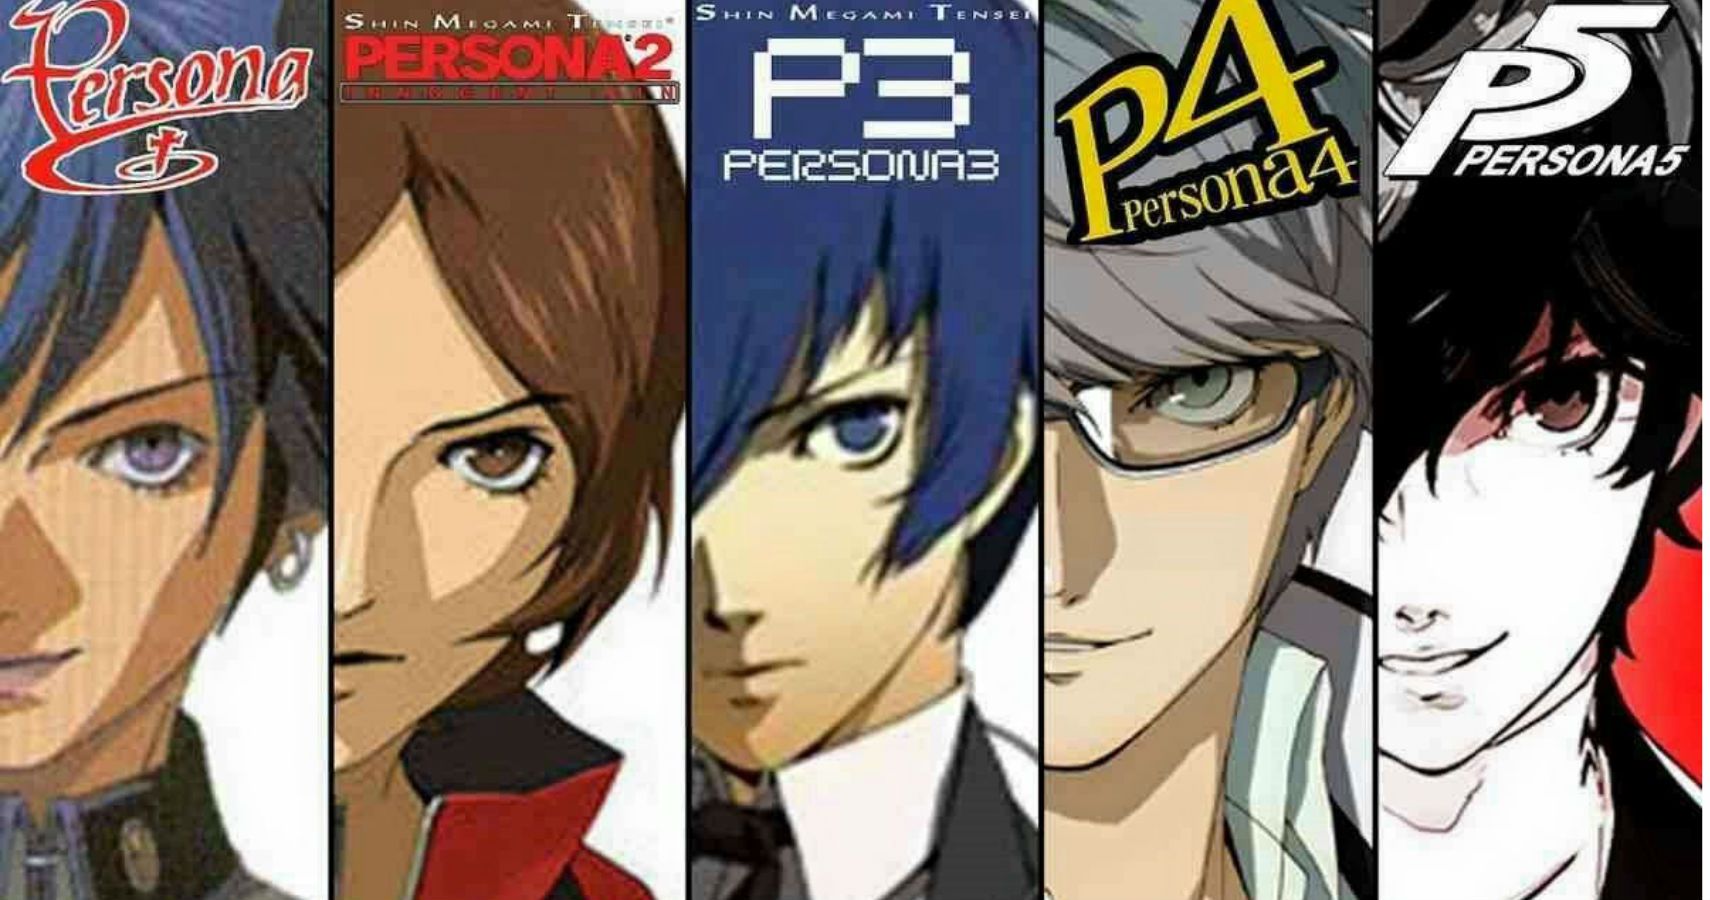 2020-might-be-a-big-year-for-persona-fans